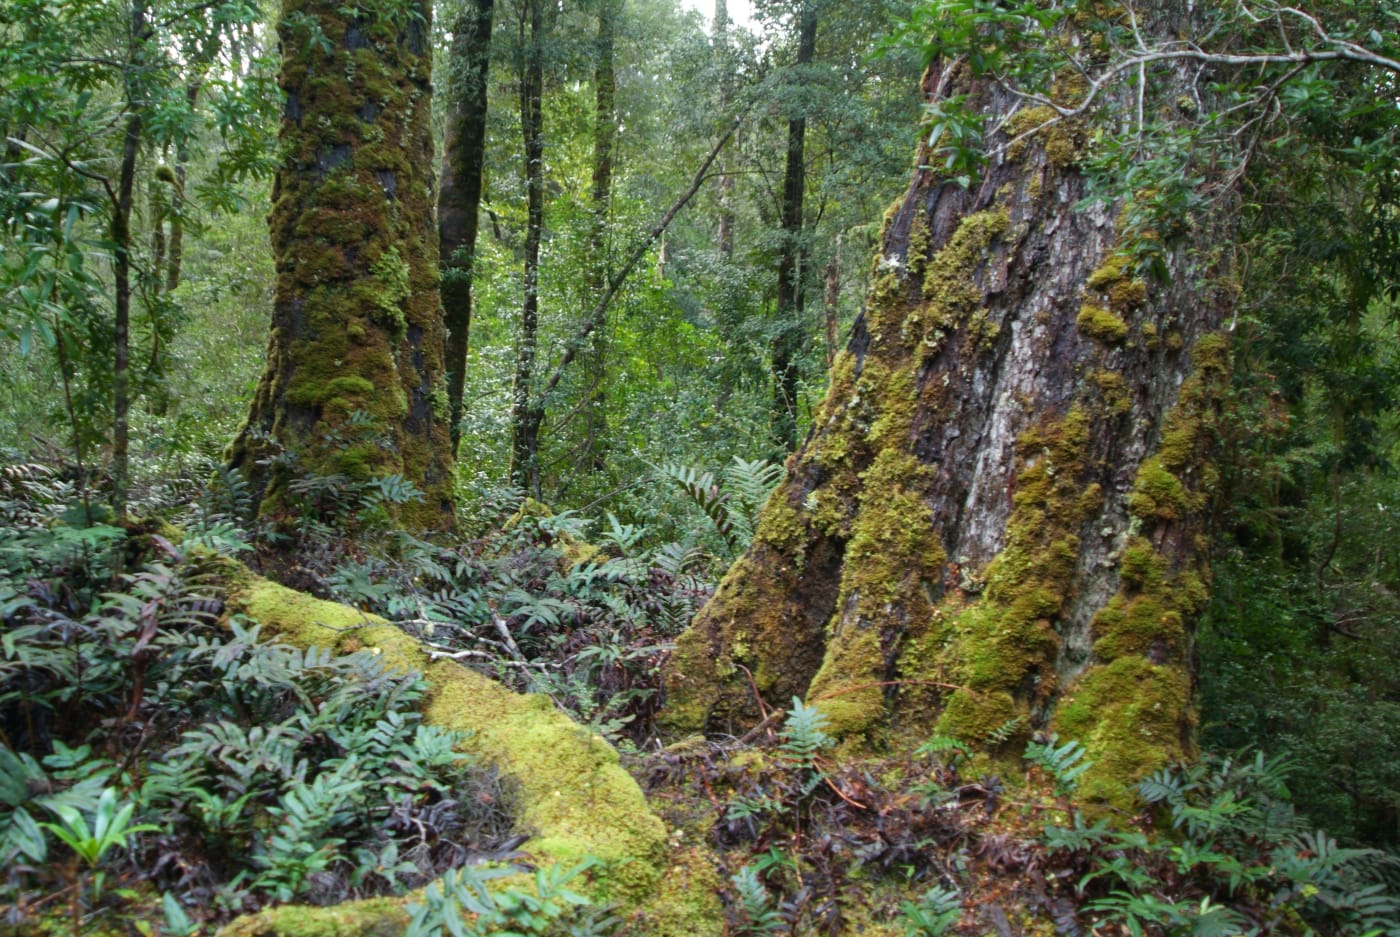 The Tarkine covers 450,000 hectares